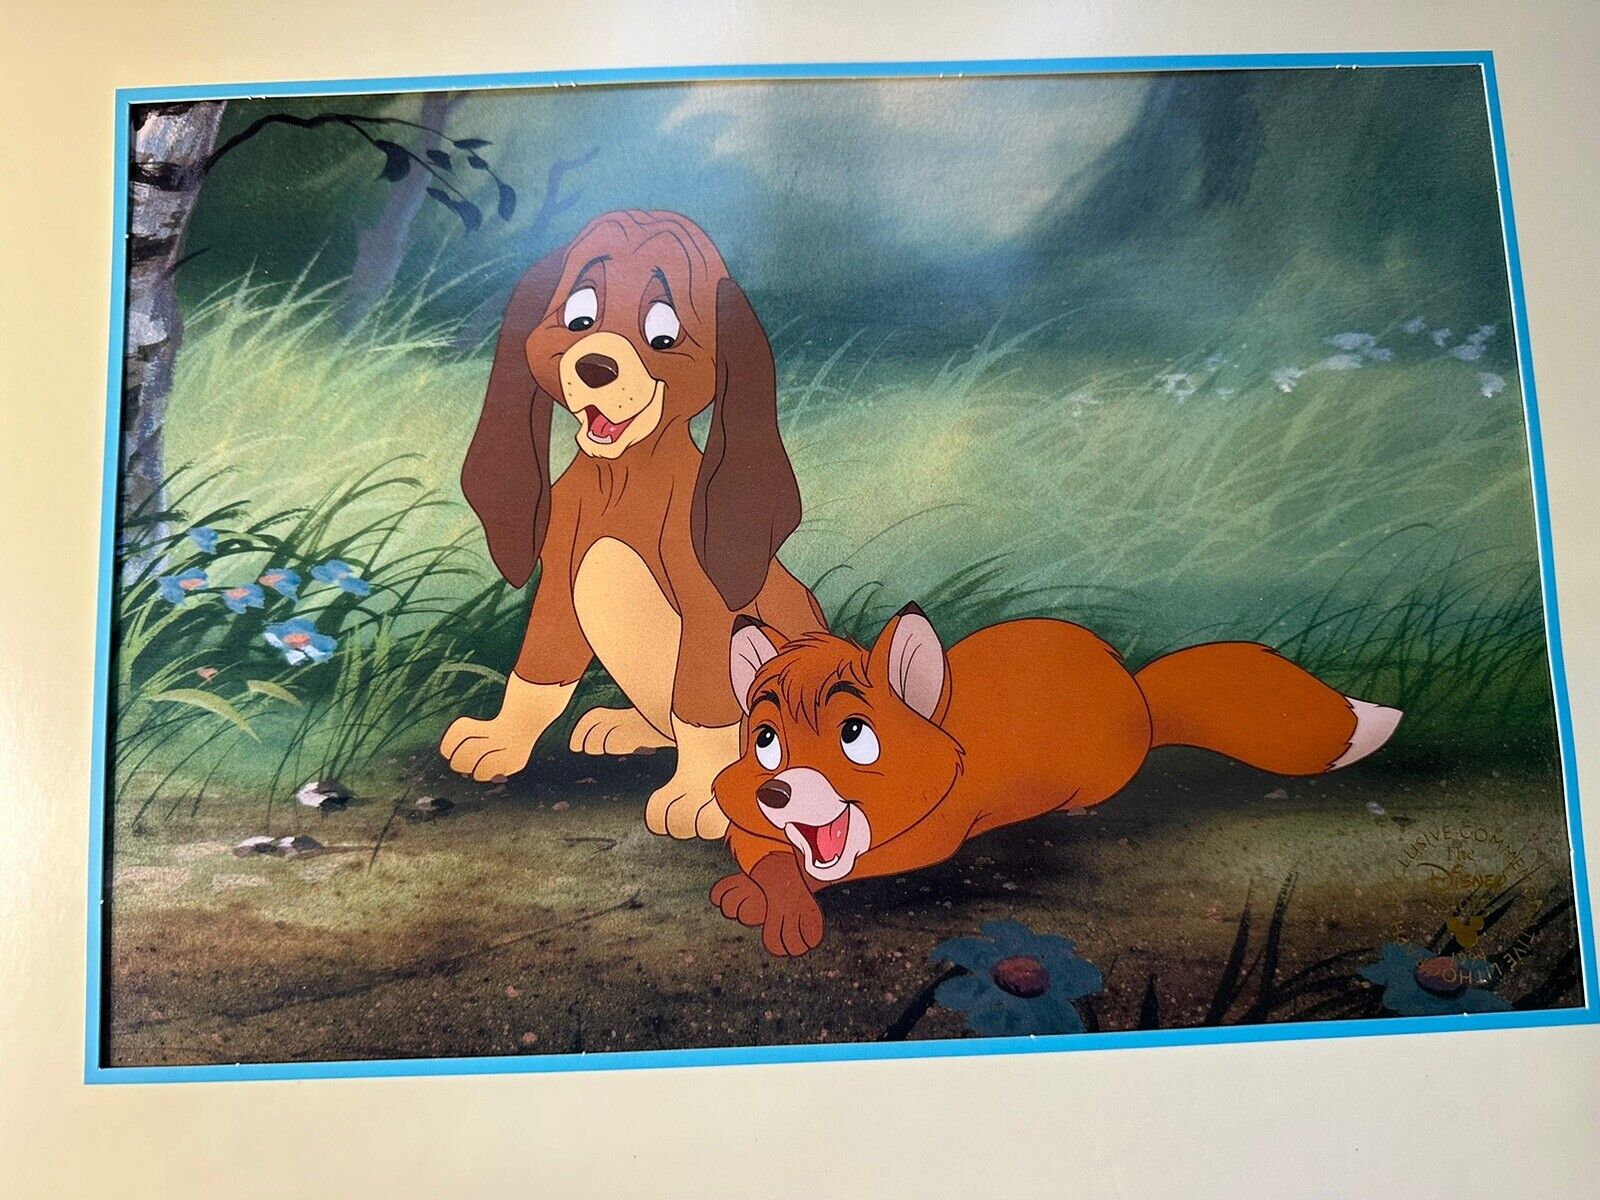 Disney Store 1994 Exclusive The Fox and the Hound Commemorative Lithograph